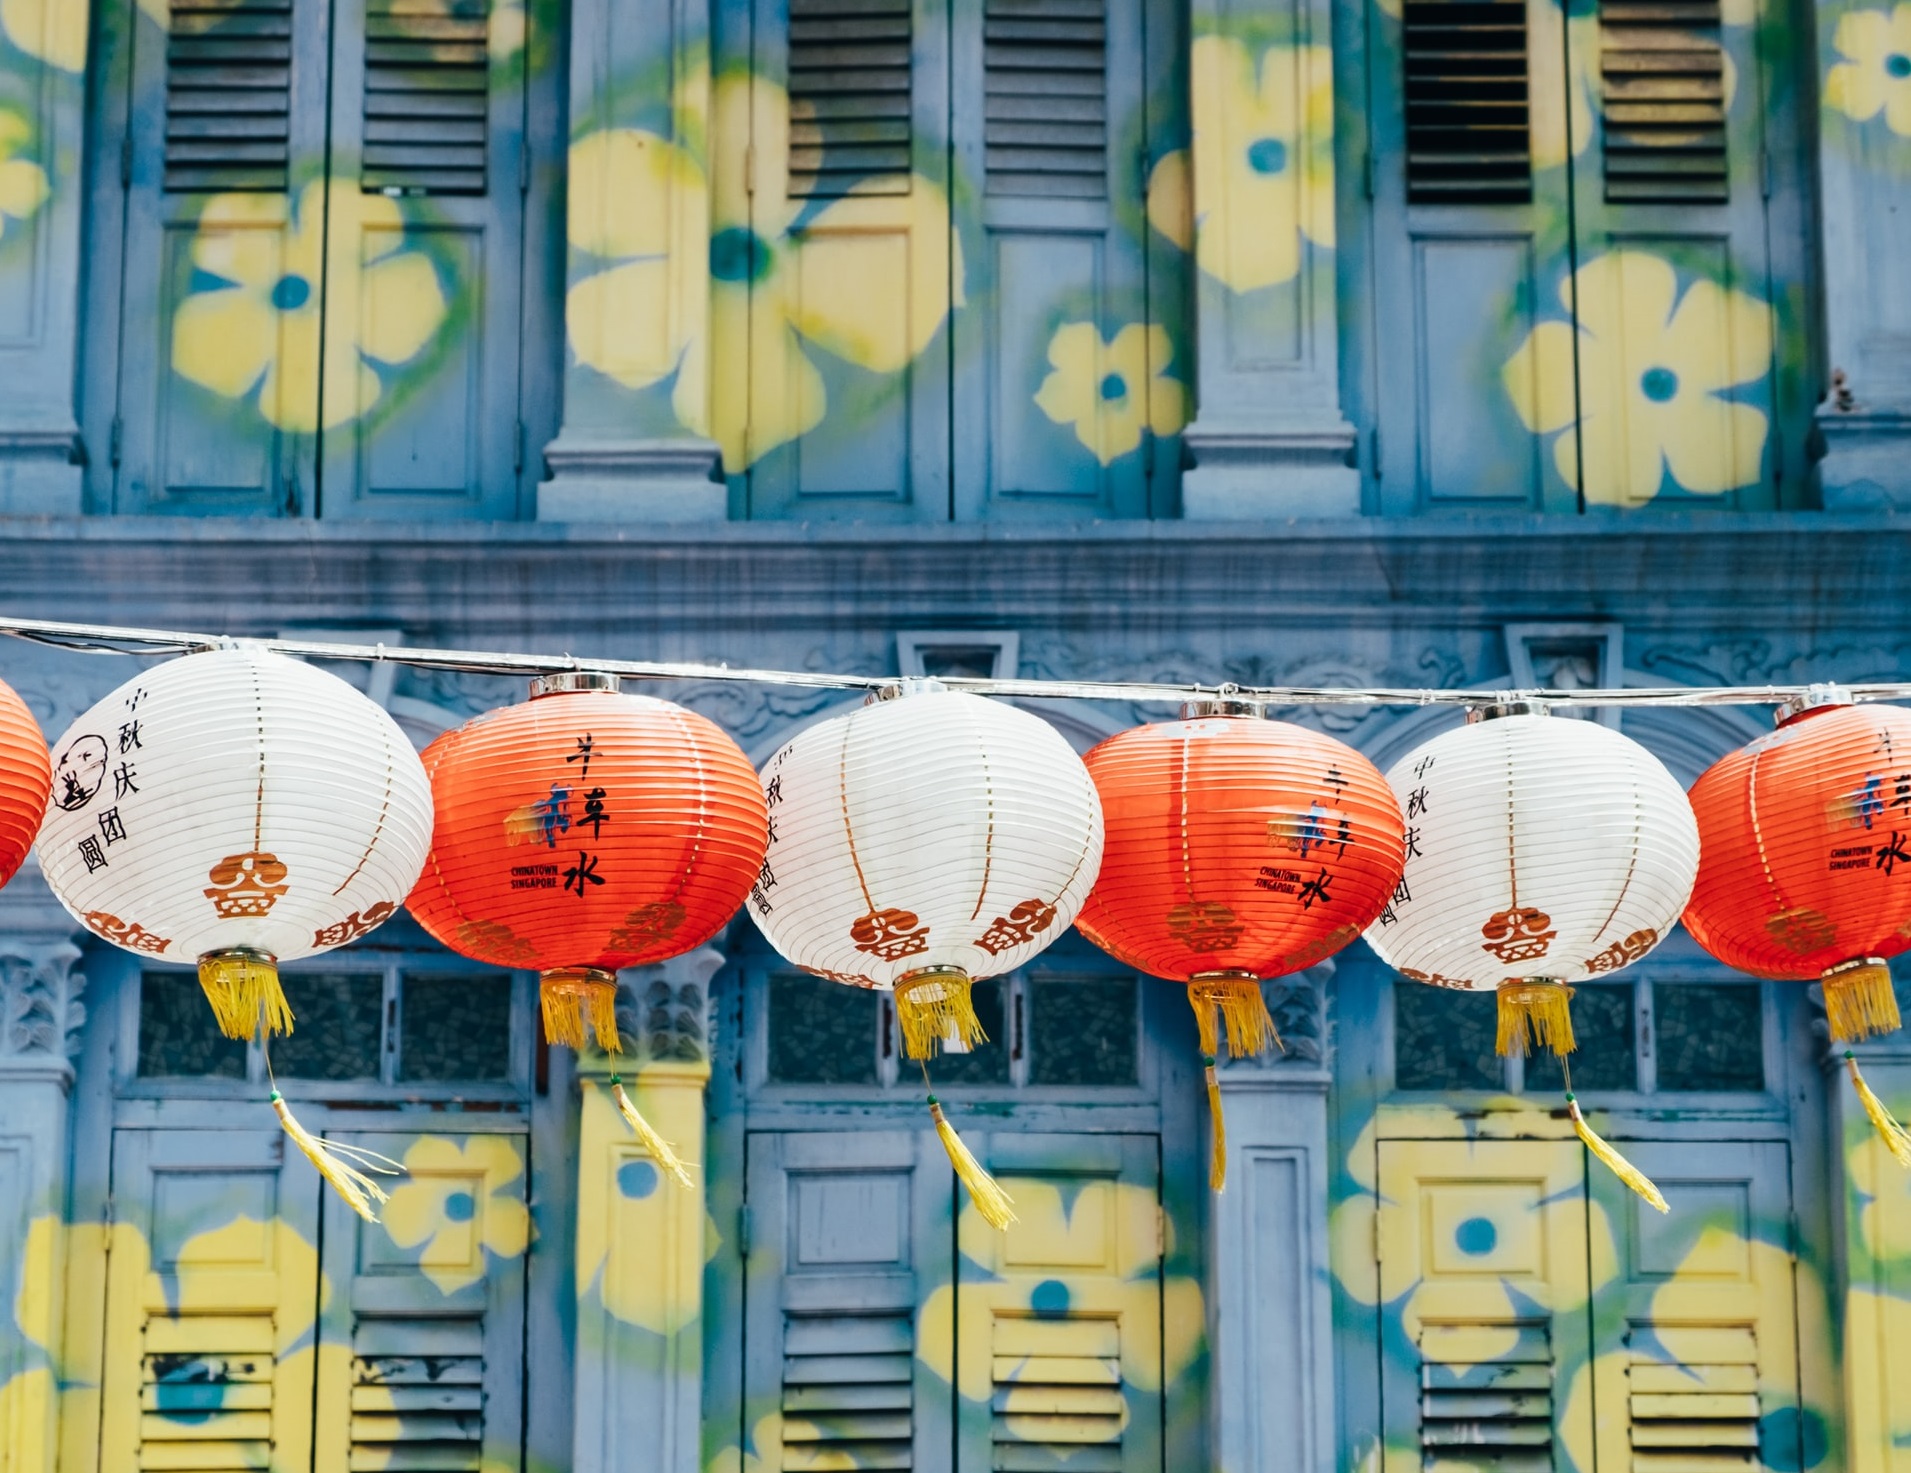 Chinese paper lanterns in front of a blue and yellow floral mural